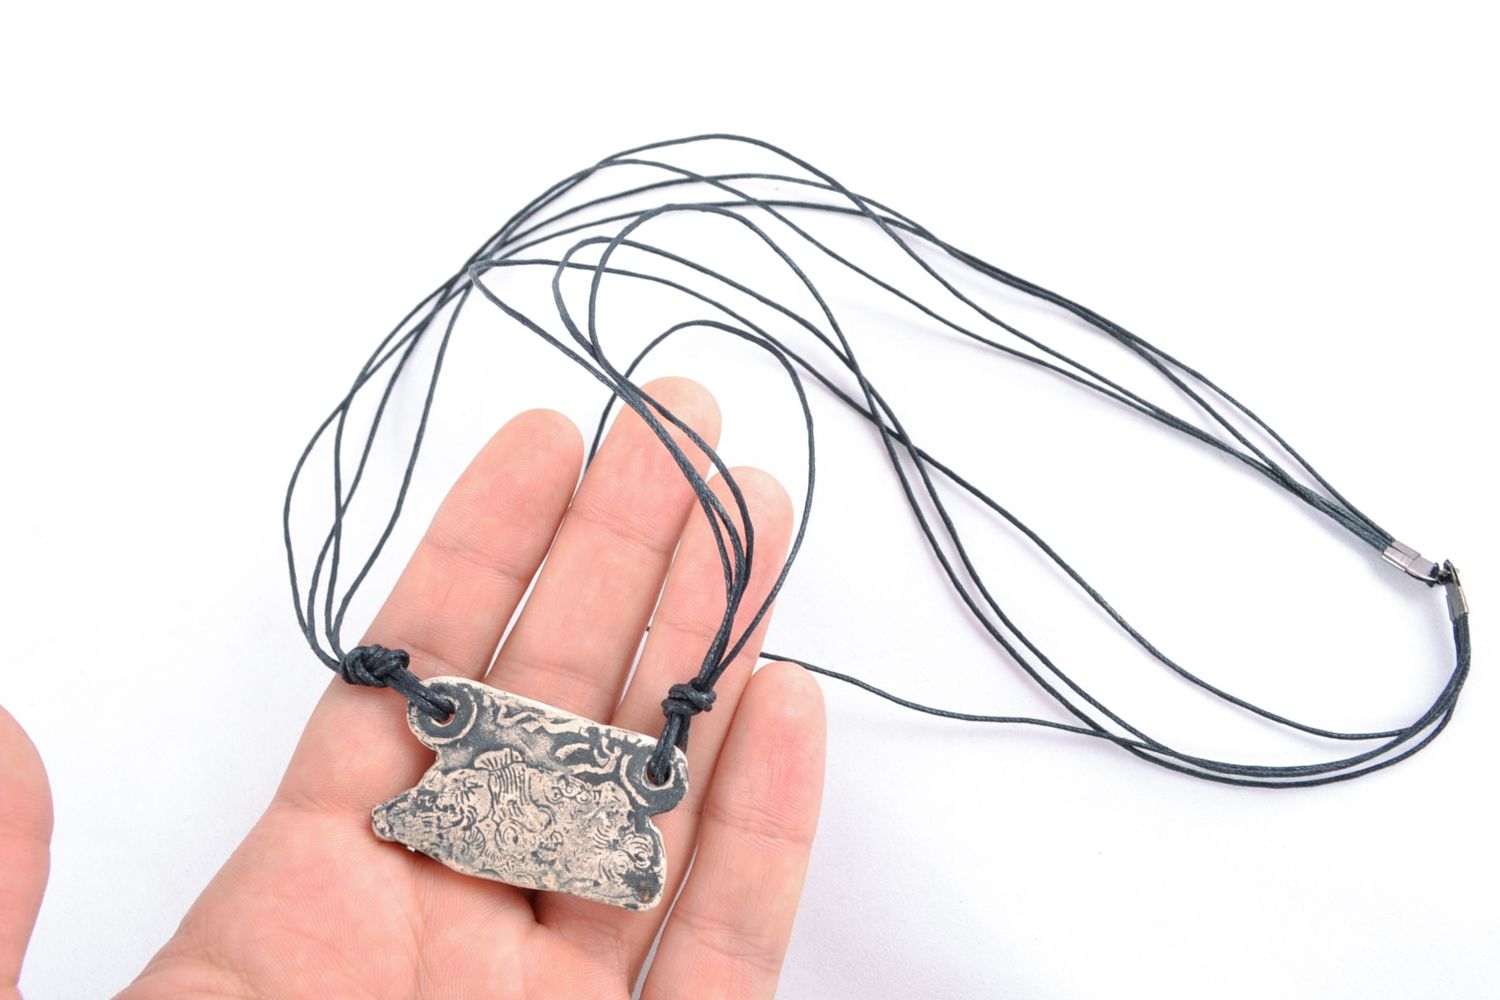 Ceramic pendant in ethnic style with cord photo 2